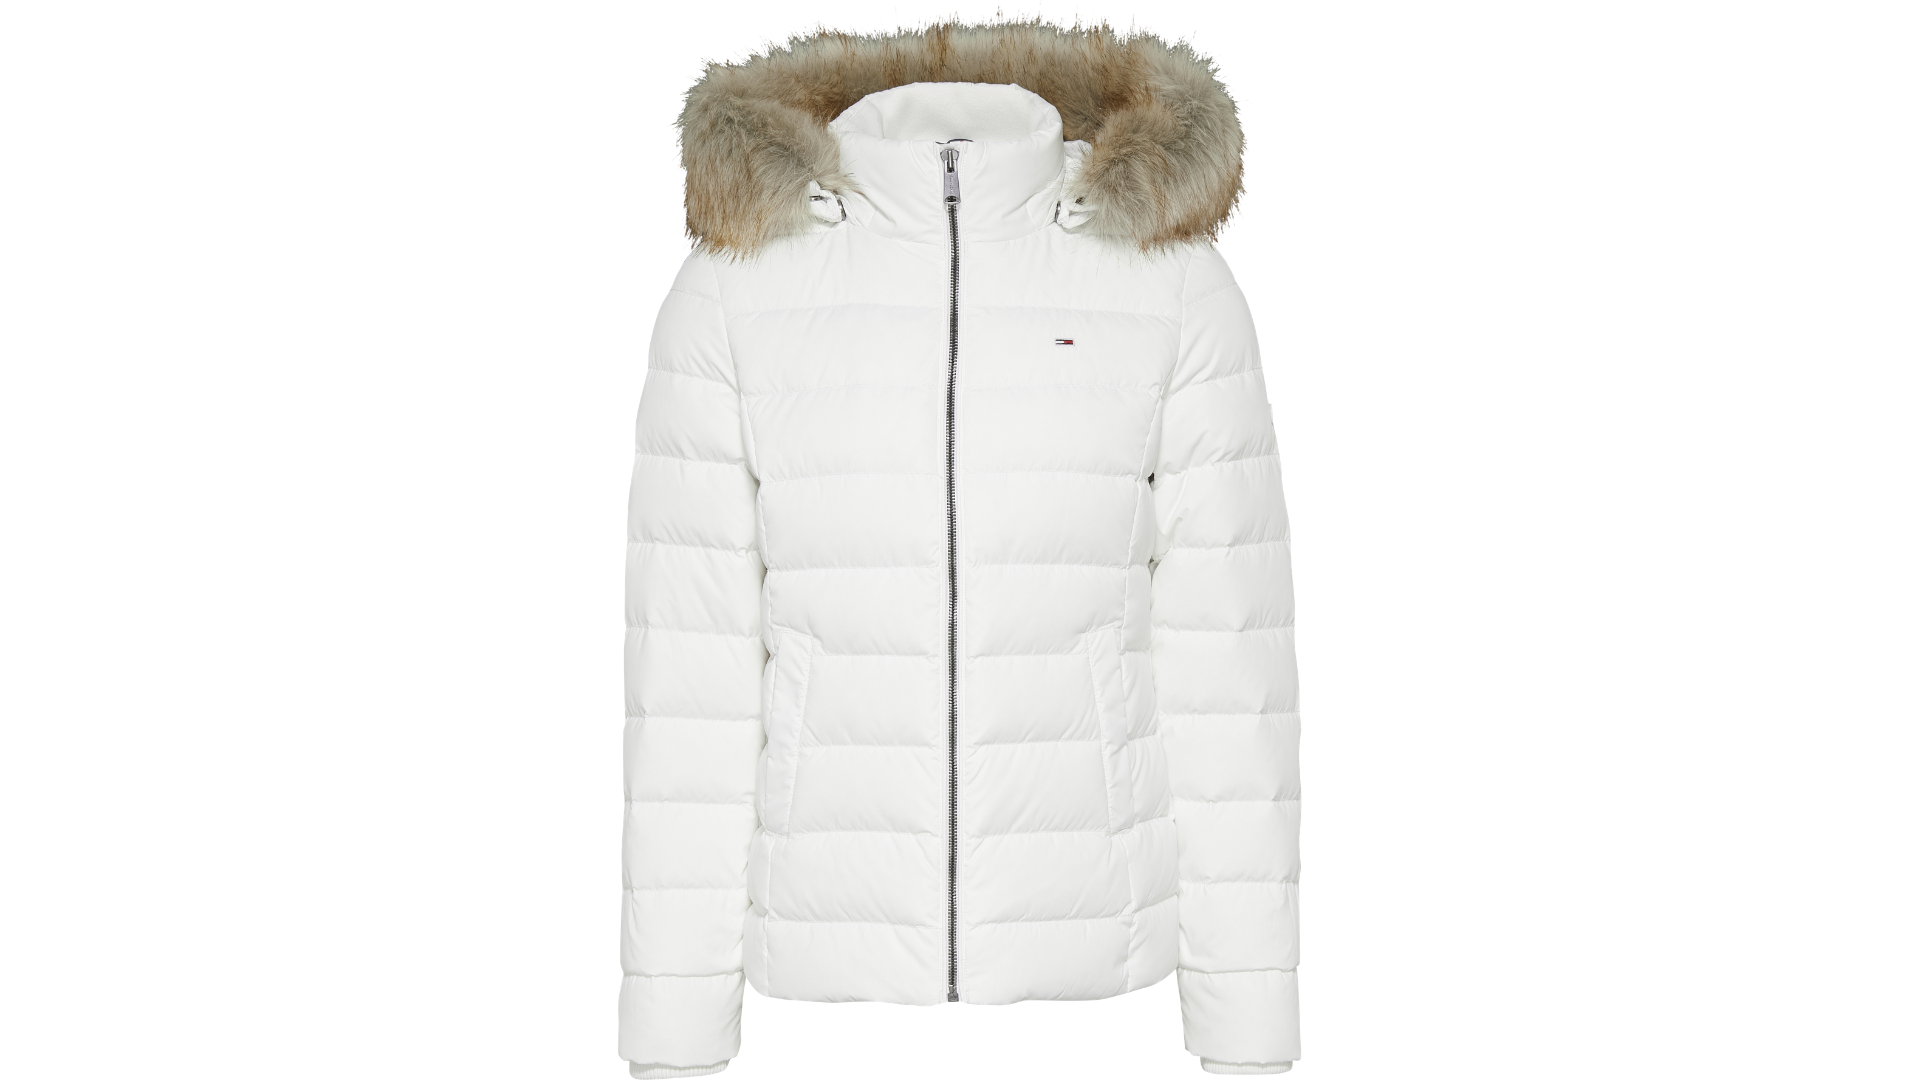 CHAQUETA HOODED TOMMY HILFIGER MUJER